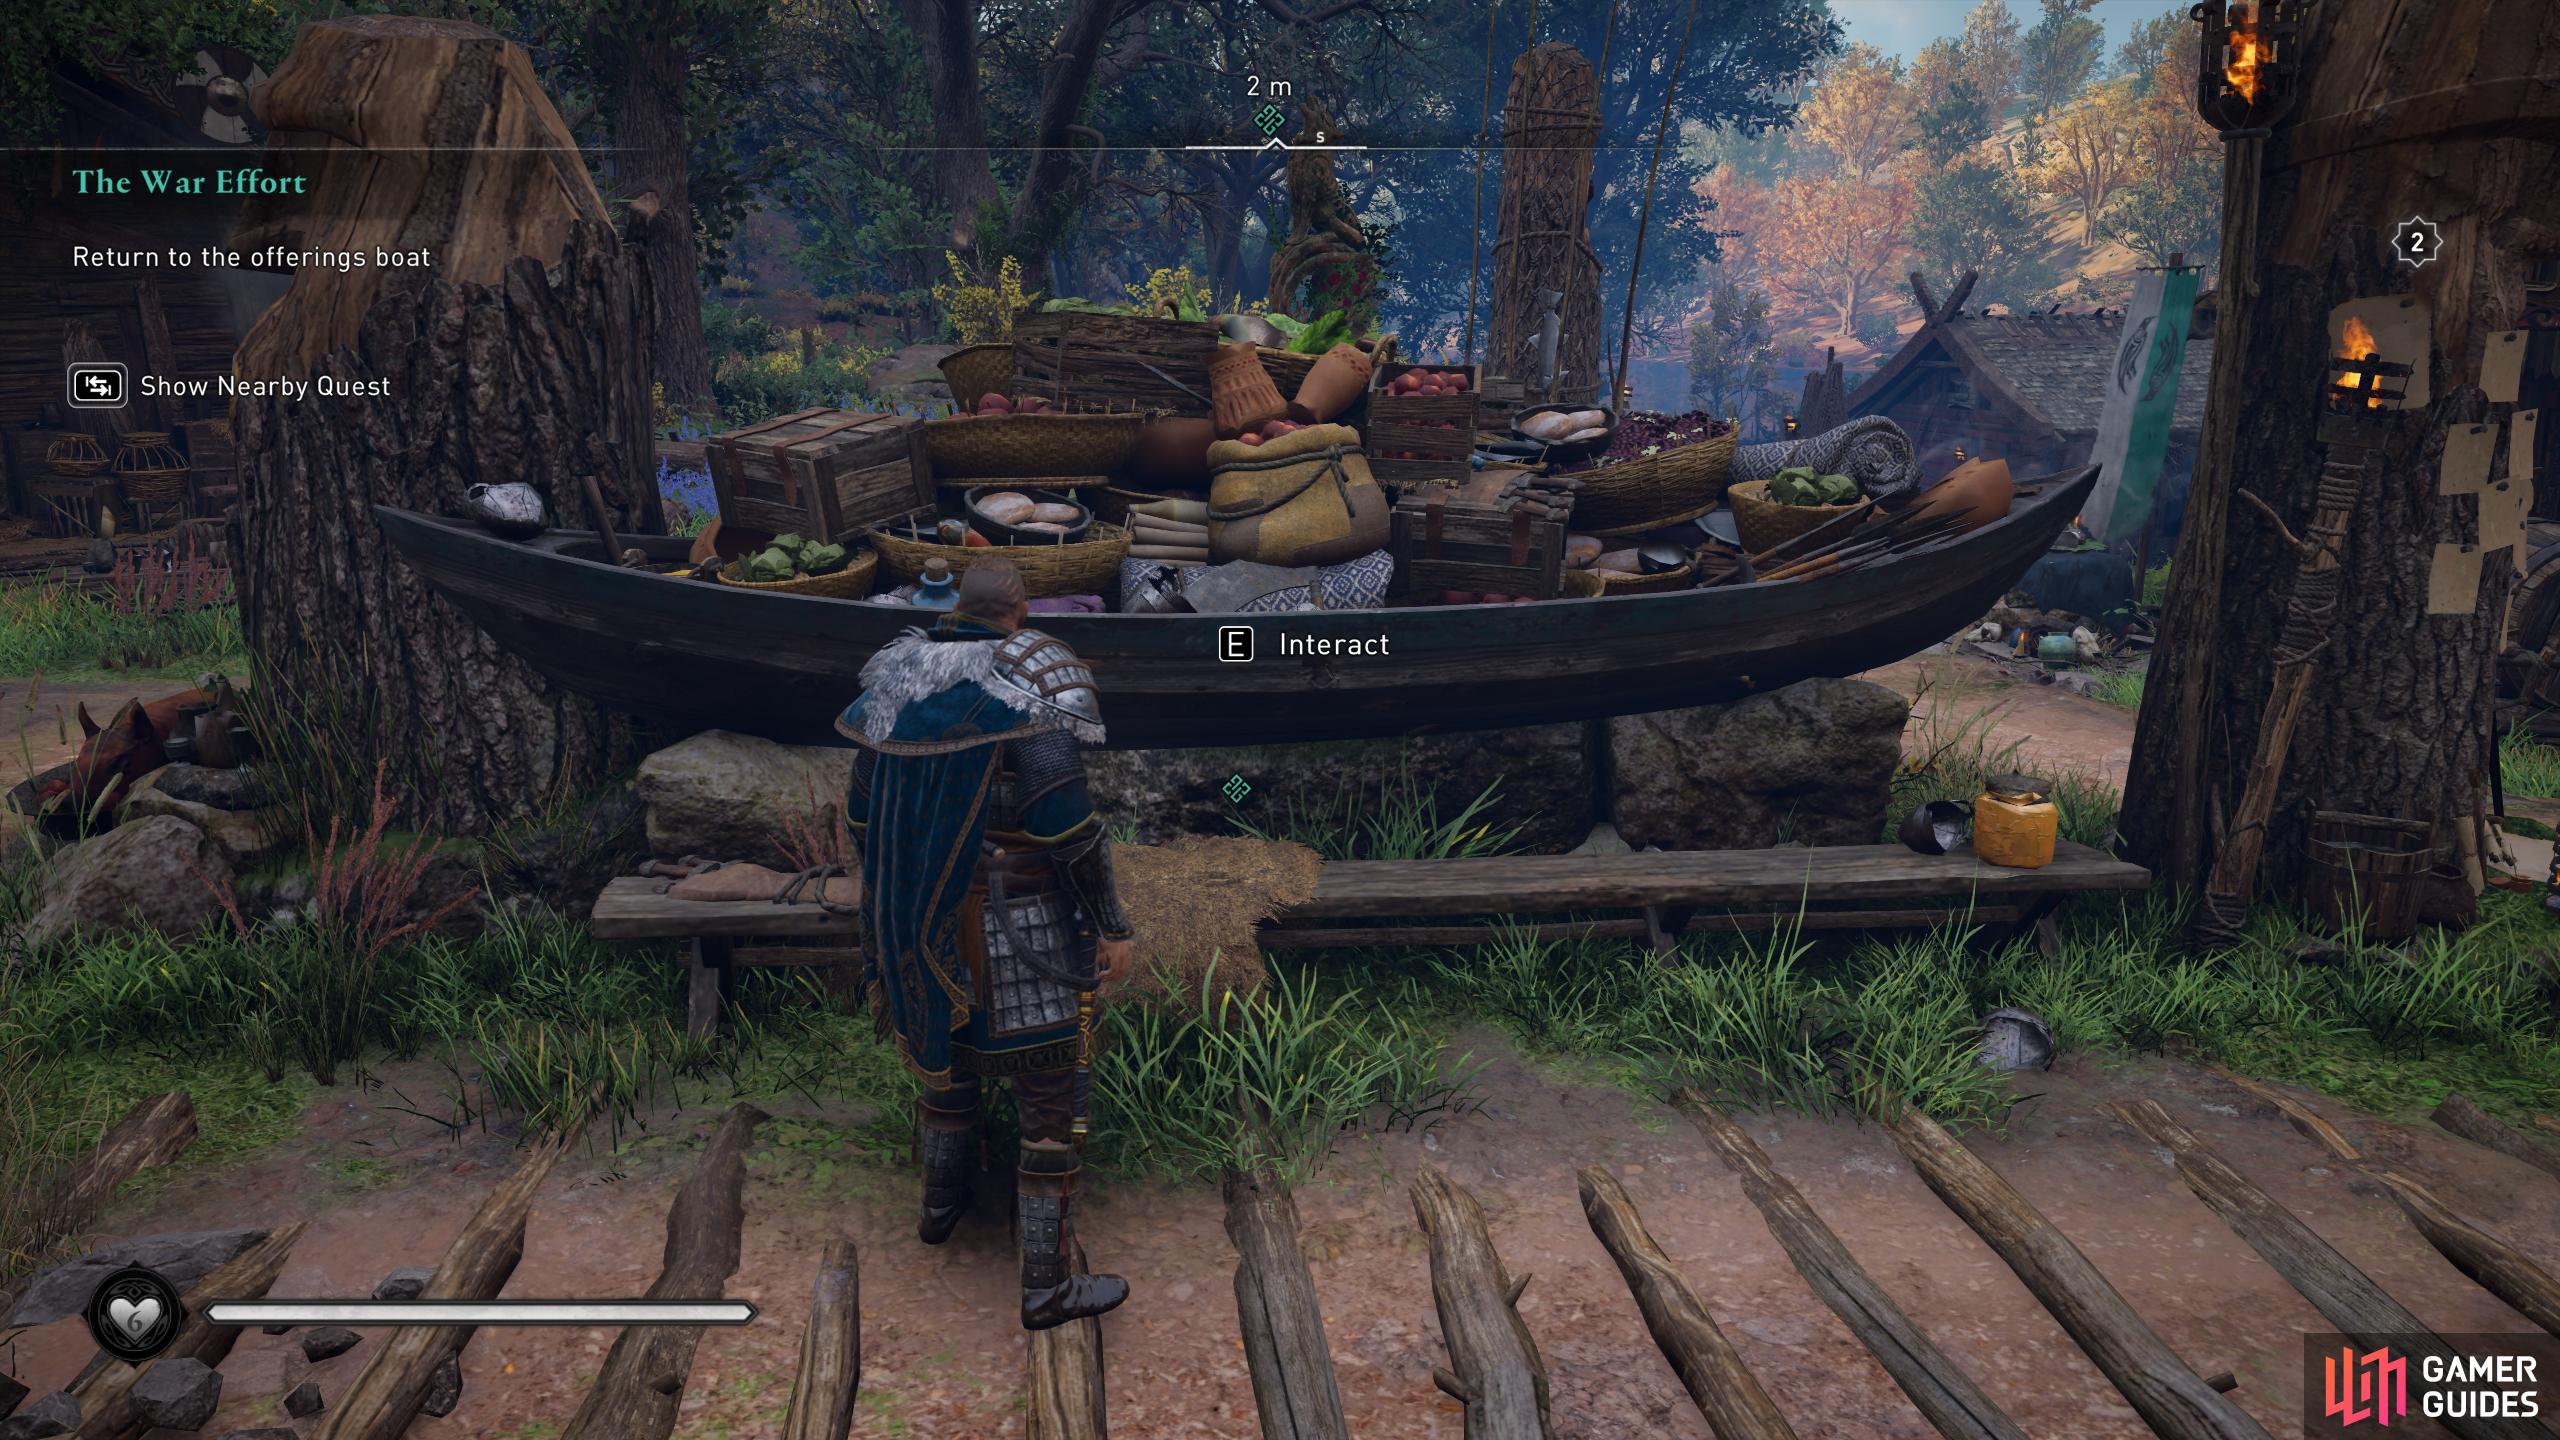 Once youve completed all the tasks, make the offering at the boat to complete the quest.